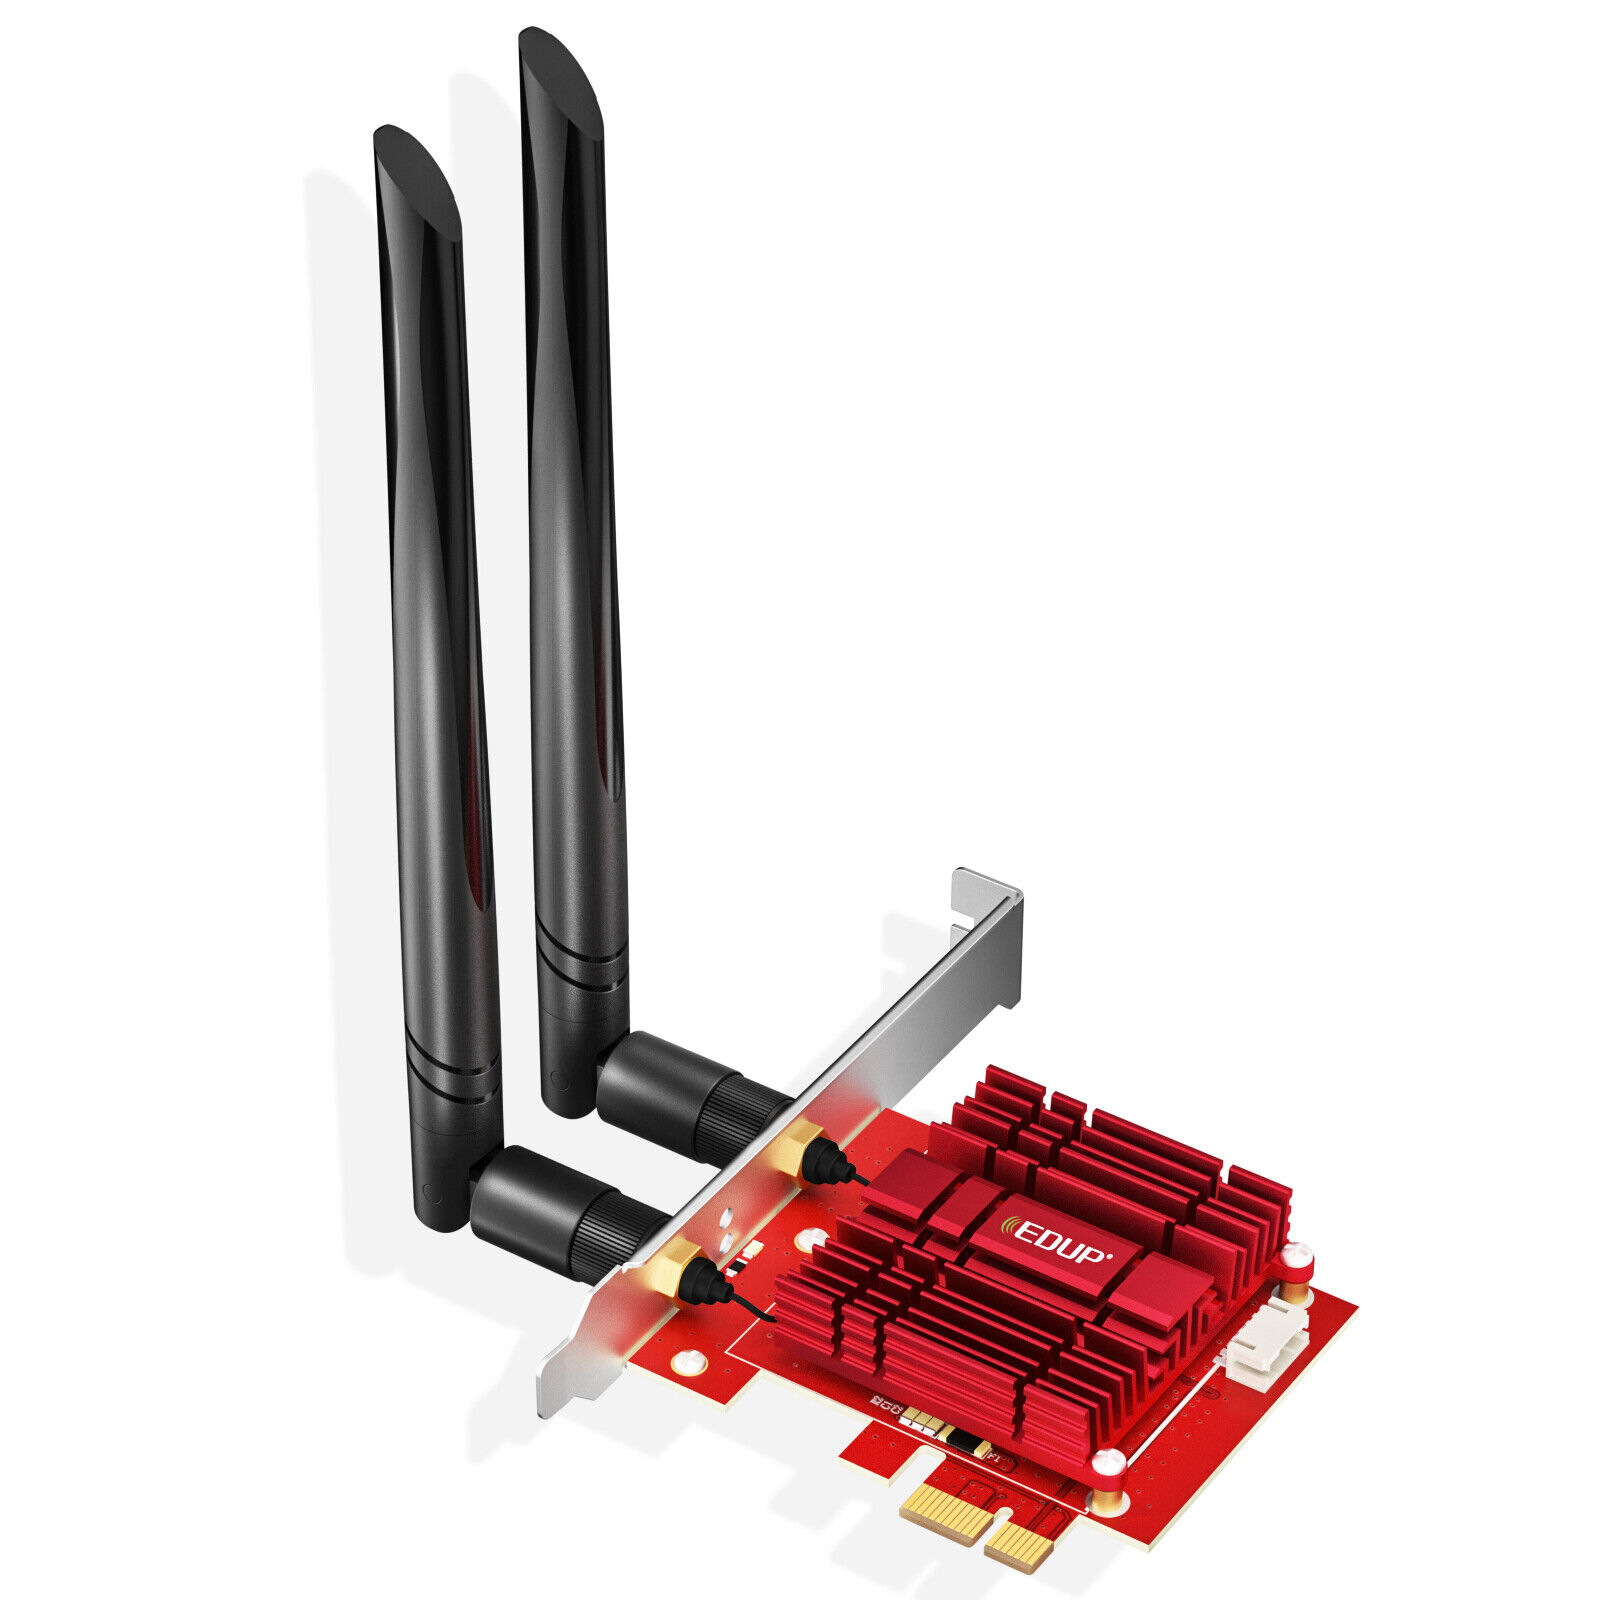 Red 3000Mbps Wifi 6 AX200 PCI-E Wifi Card Adapter Bluetooth 5.1 EP-9636G for PC